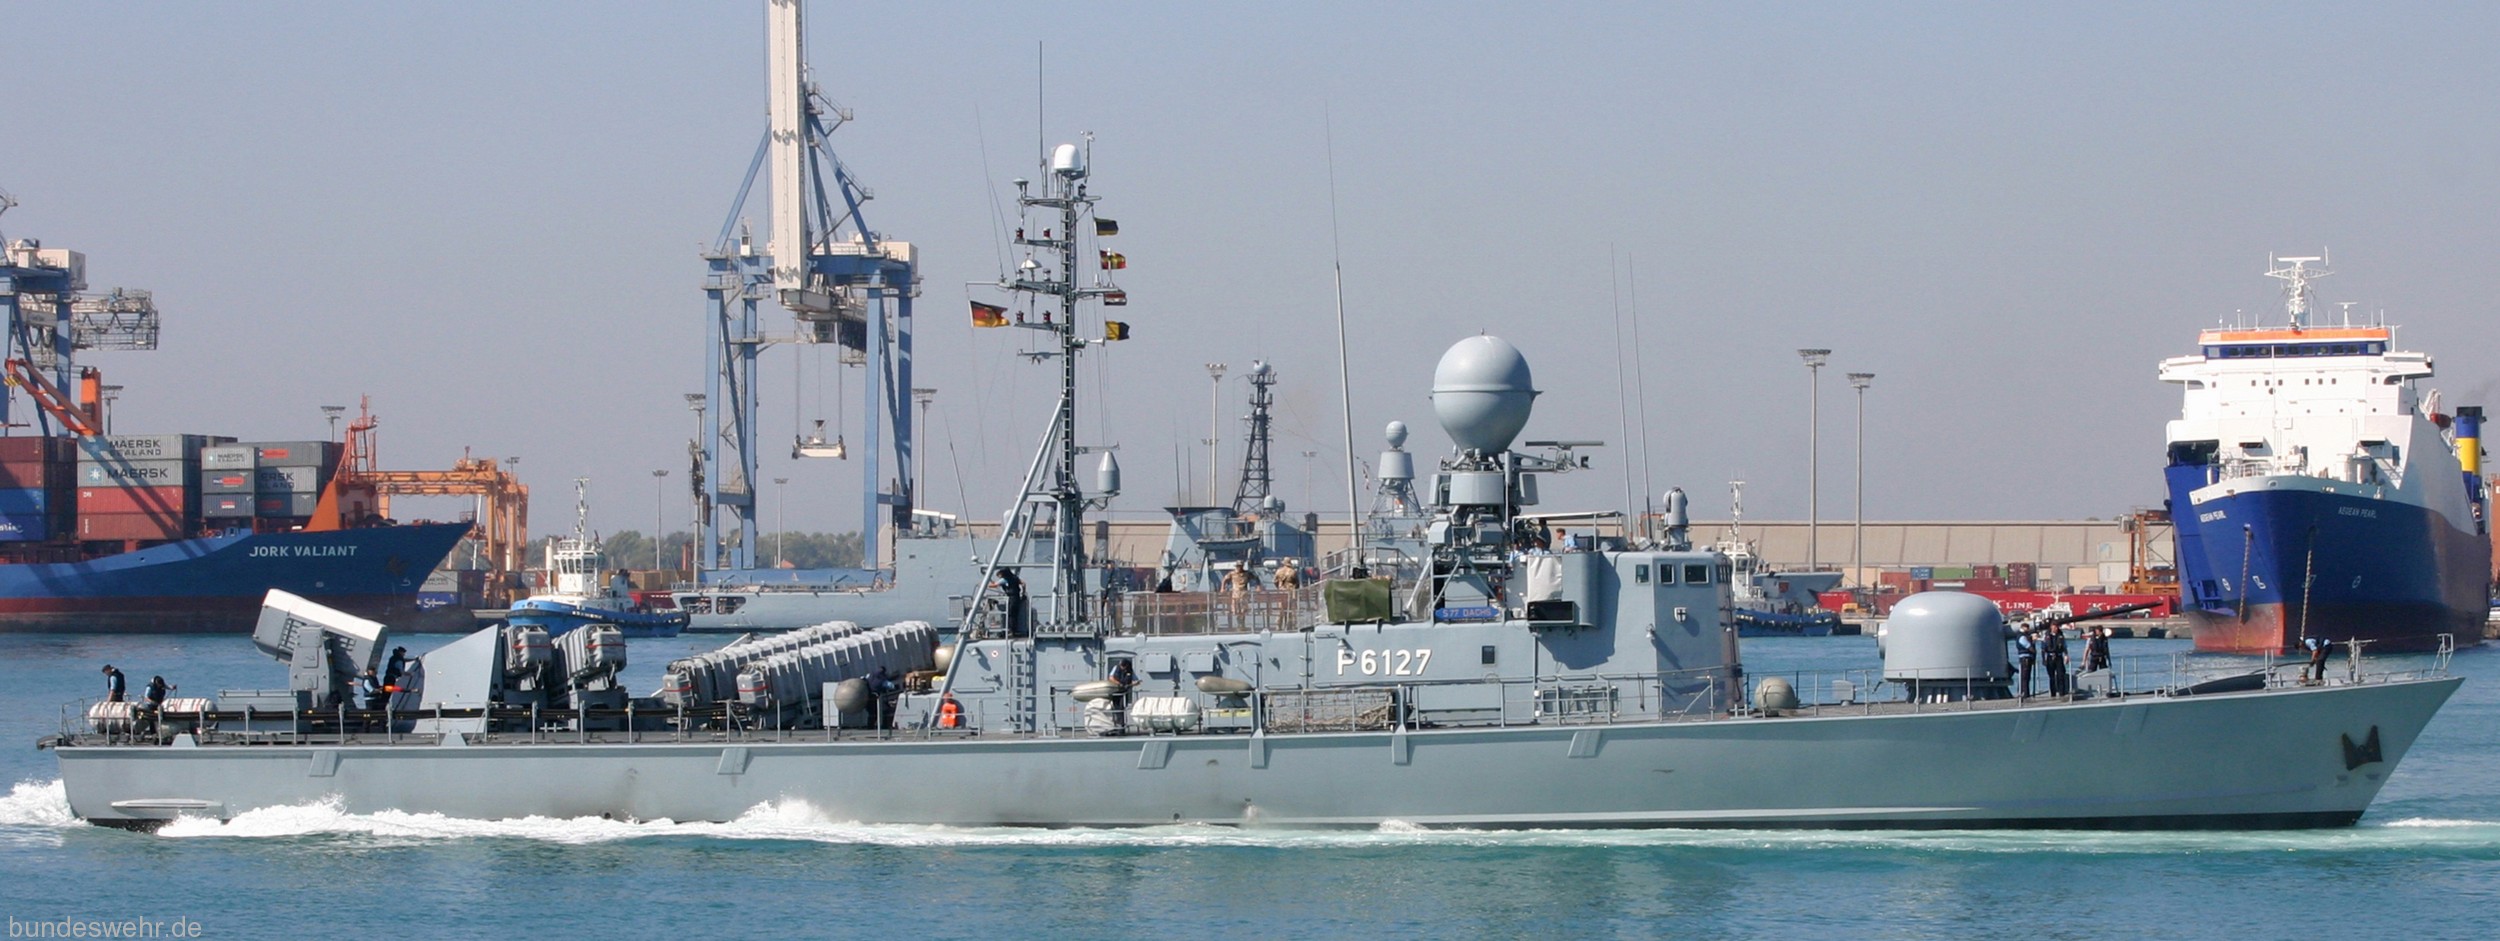 p6127 s77 fgs dachs type 143a gepard class fast attack missile craft german navy 03